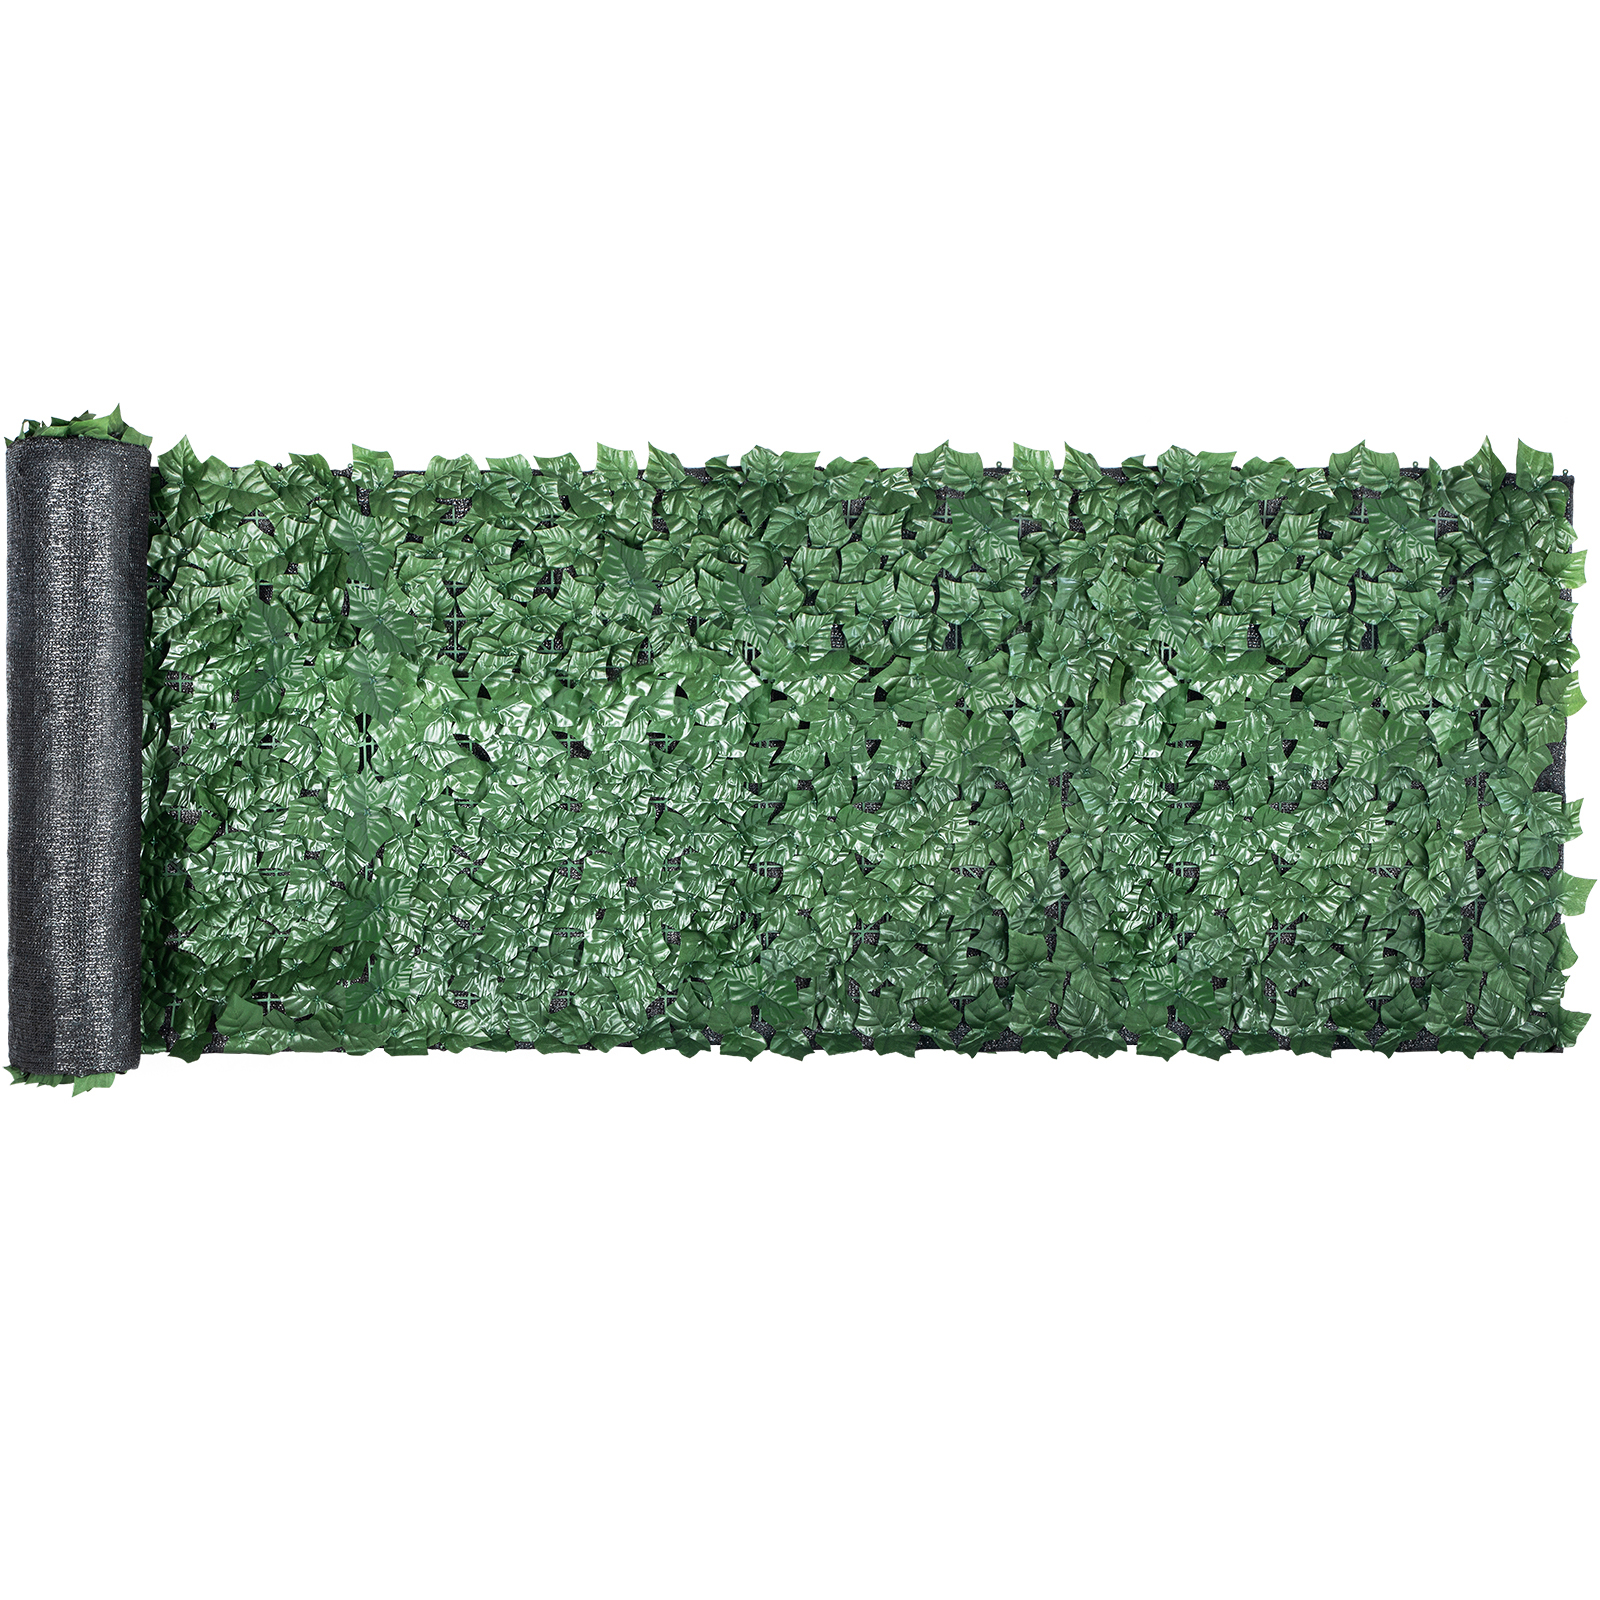 VEVOR 59"x158" Faux Ivy Leaf Artificial Hedge Privacy Fence Screen Decorative от Vevor Many GEOs